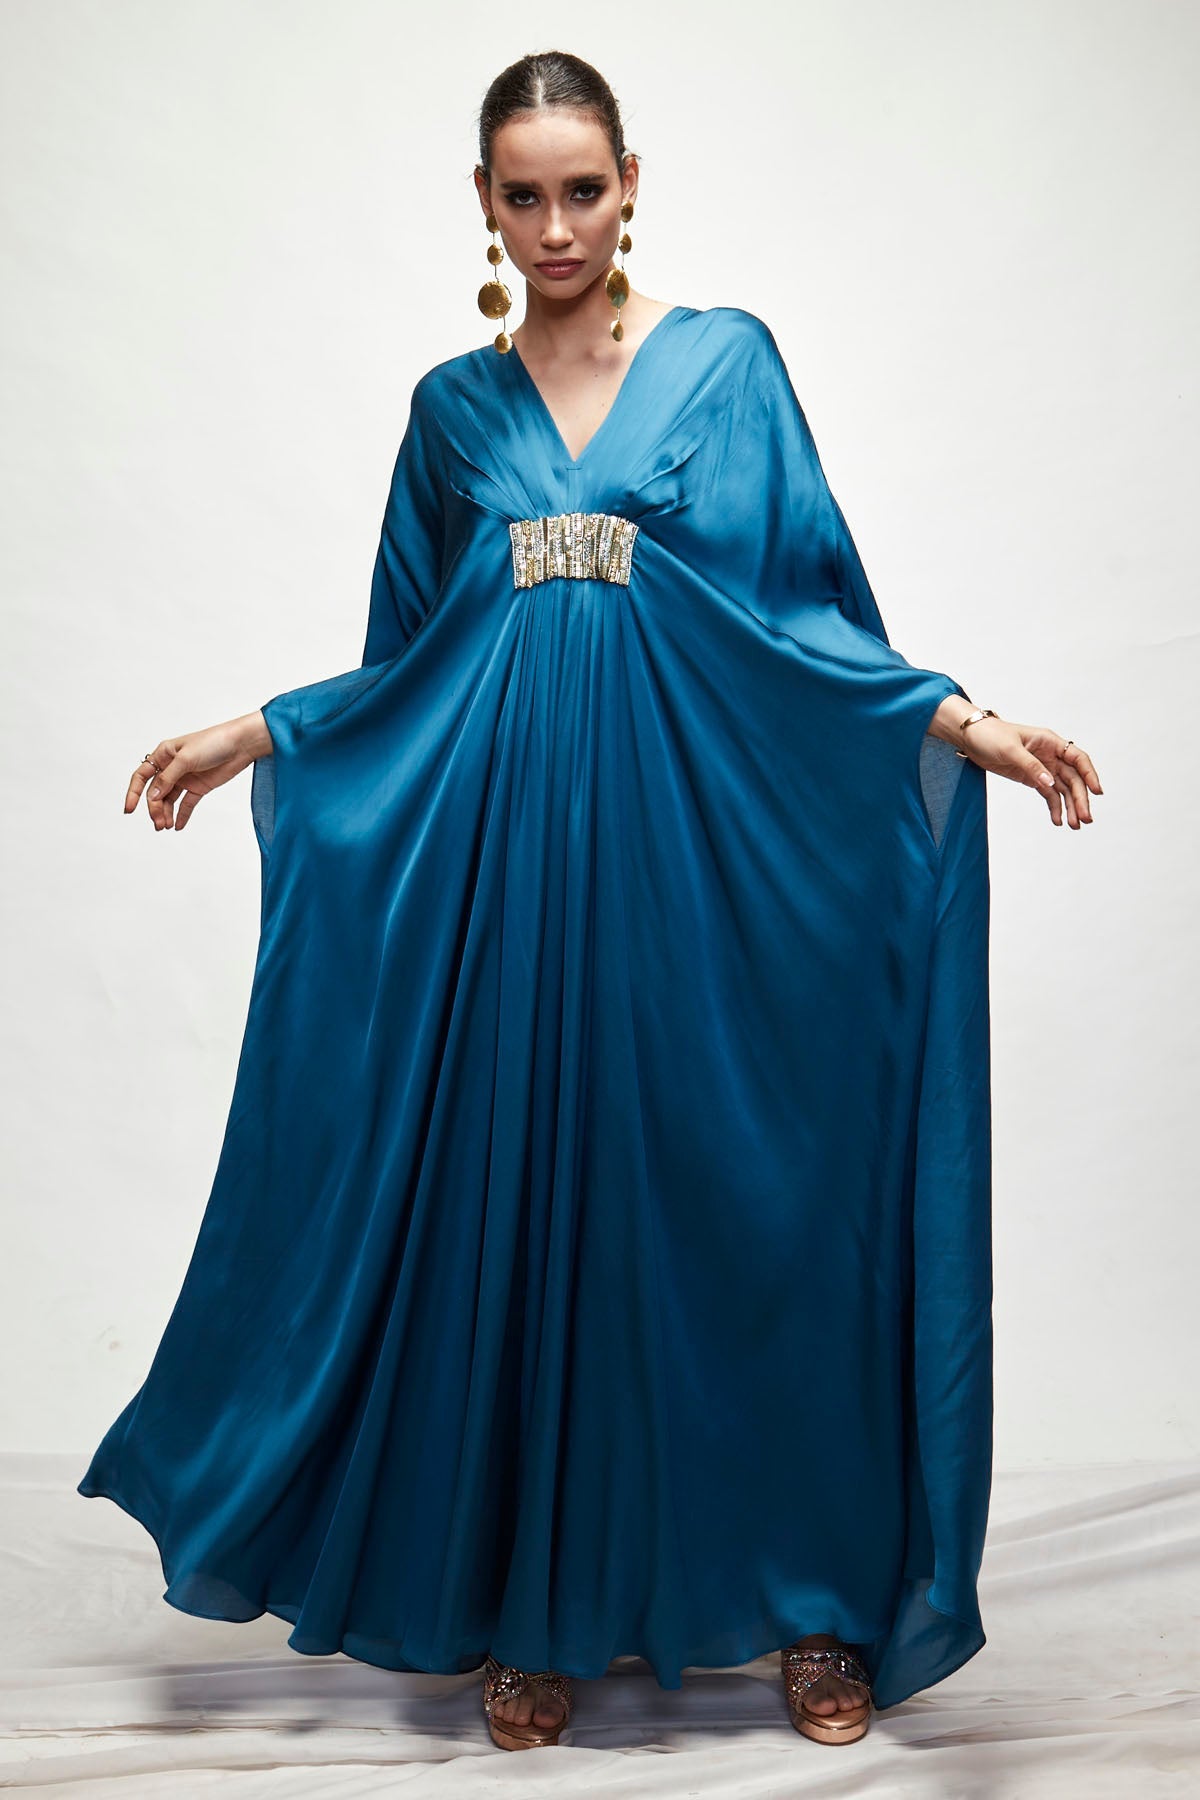 Designer Ranian Persian blue silk kaftan with front pleat detailing and beads embroidery For women Online at ScrollnShops